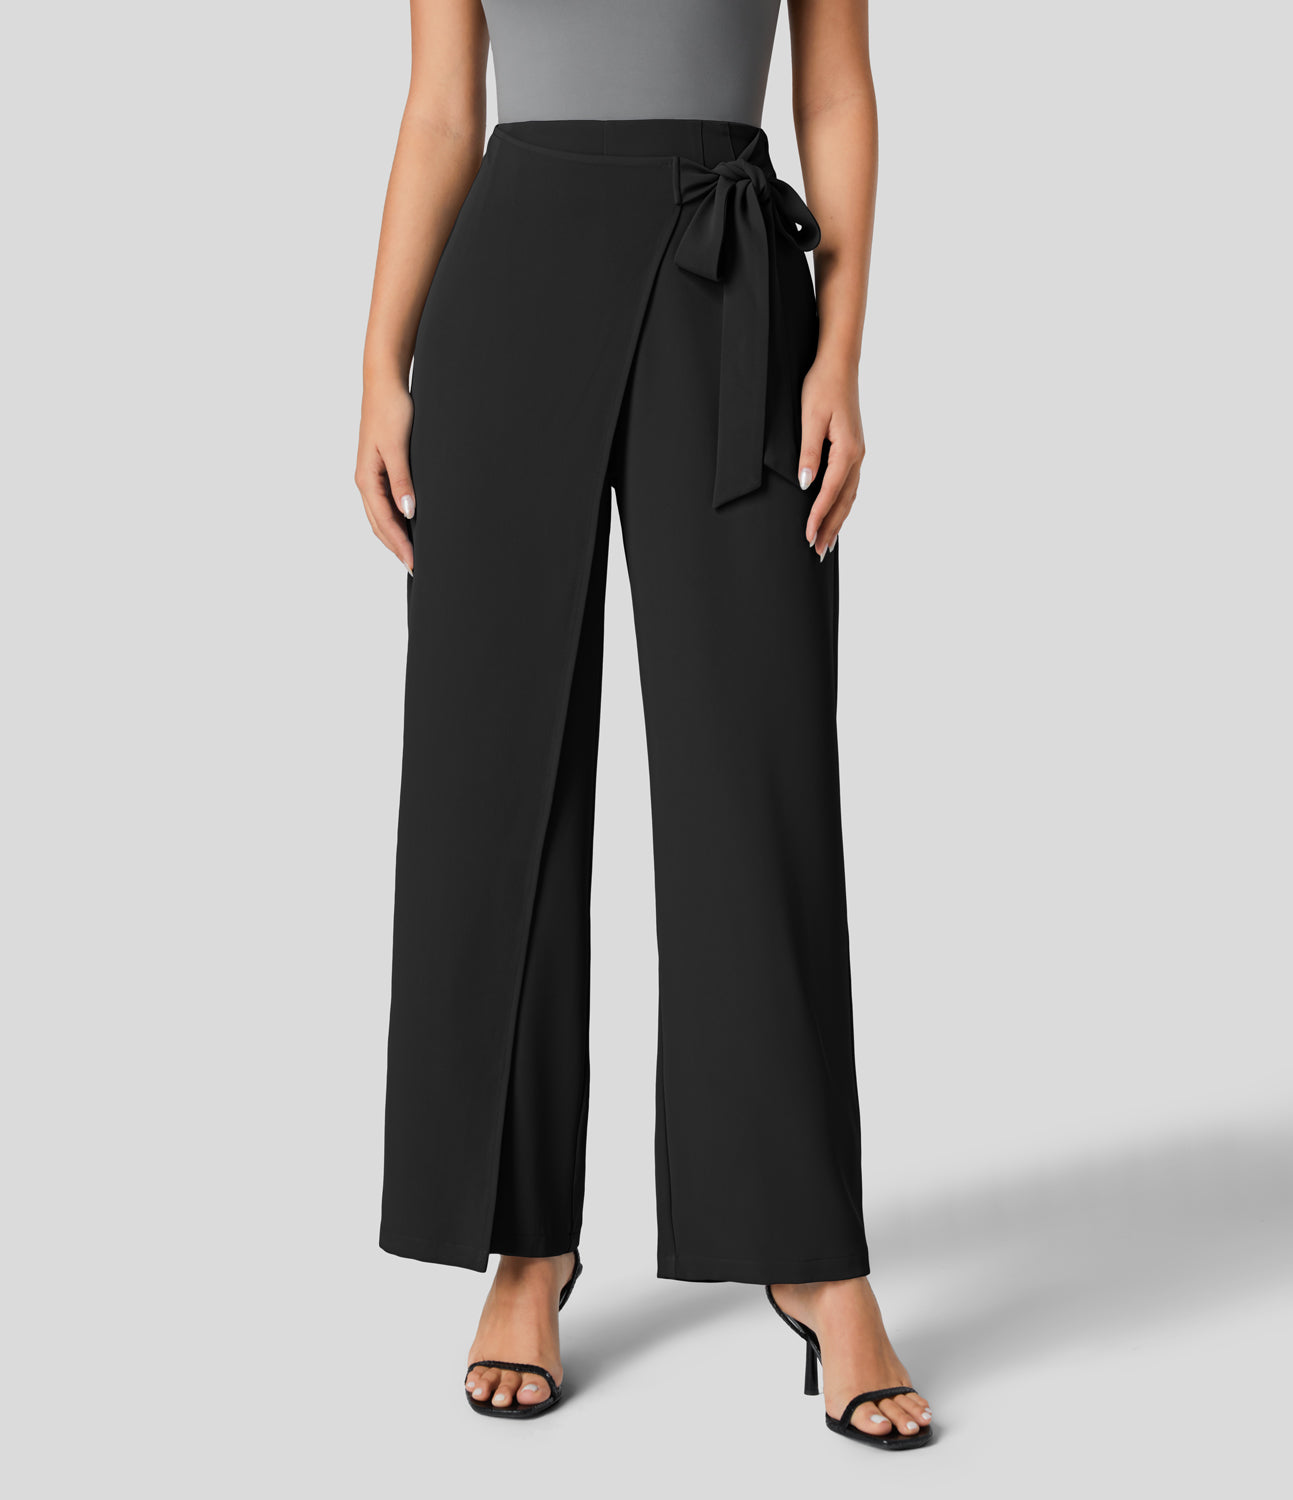 

Halara High Waisted Tie Side Invisible Zipper Wide Leg Work Suit Pants - Lead Gray -  sweatpants jogger pants stacked sweatpants